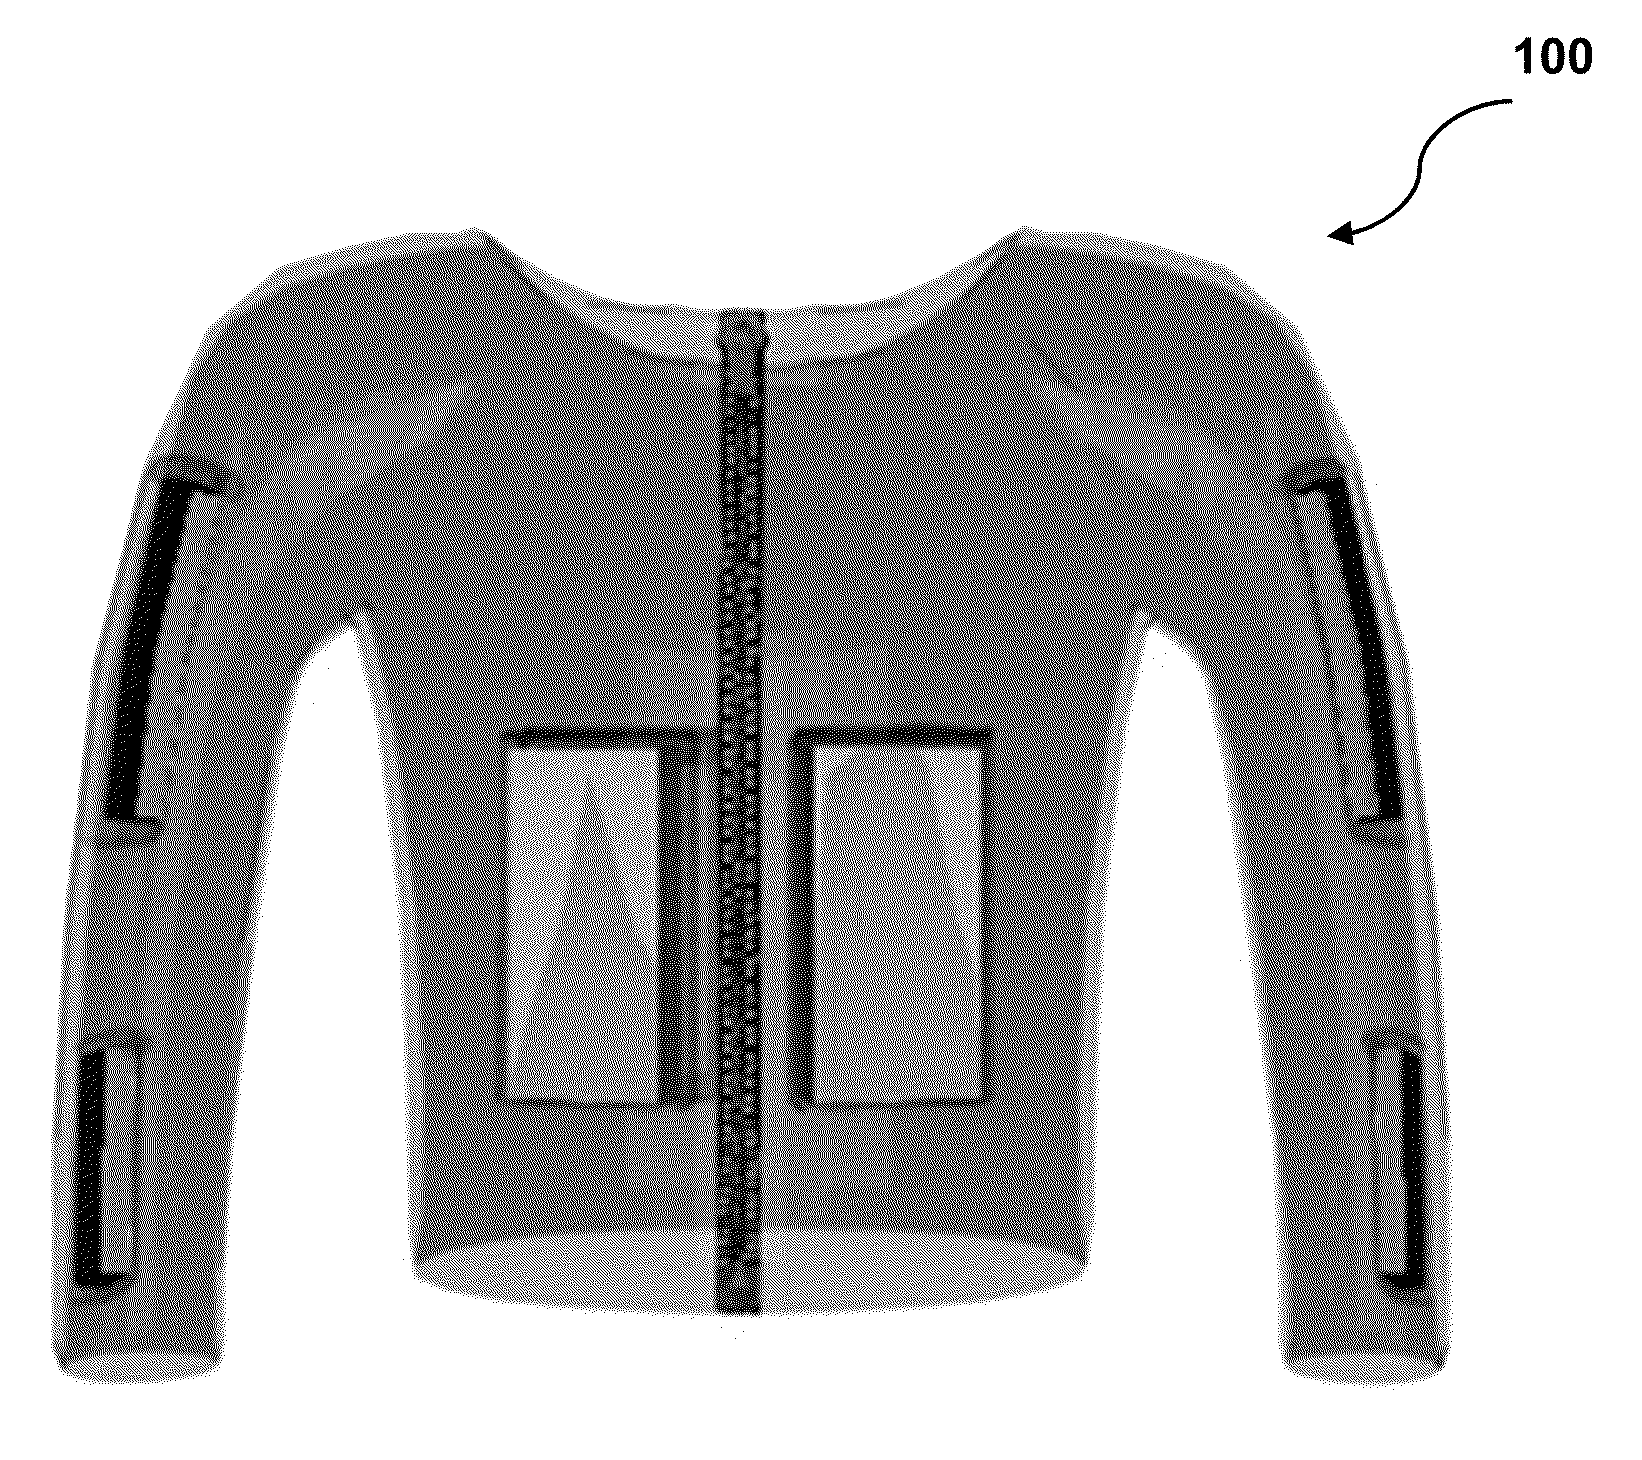 Weighted fabric articles and related materials and methods